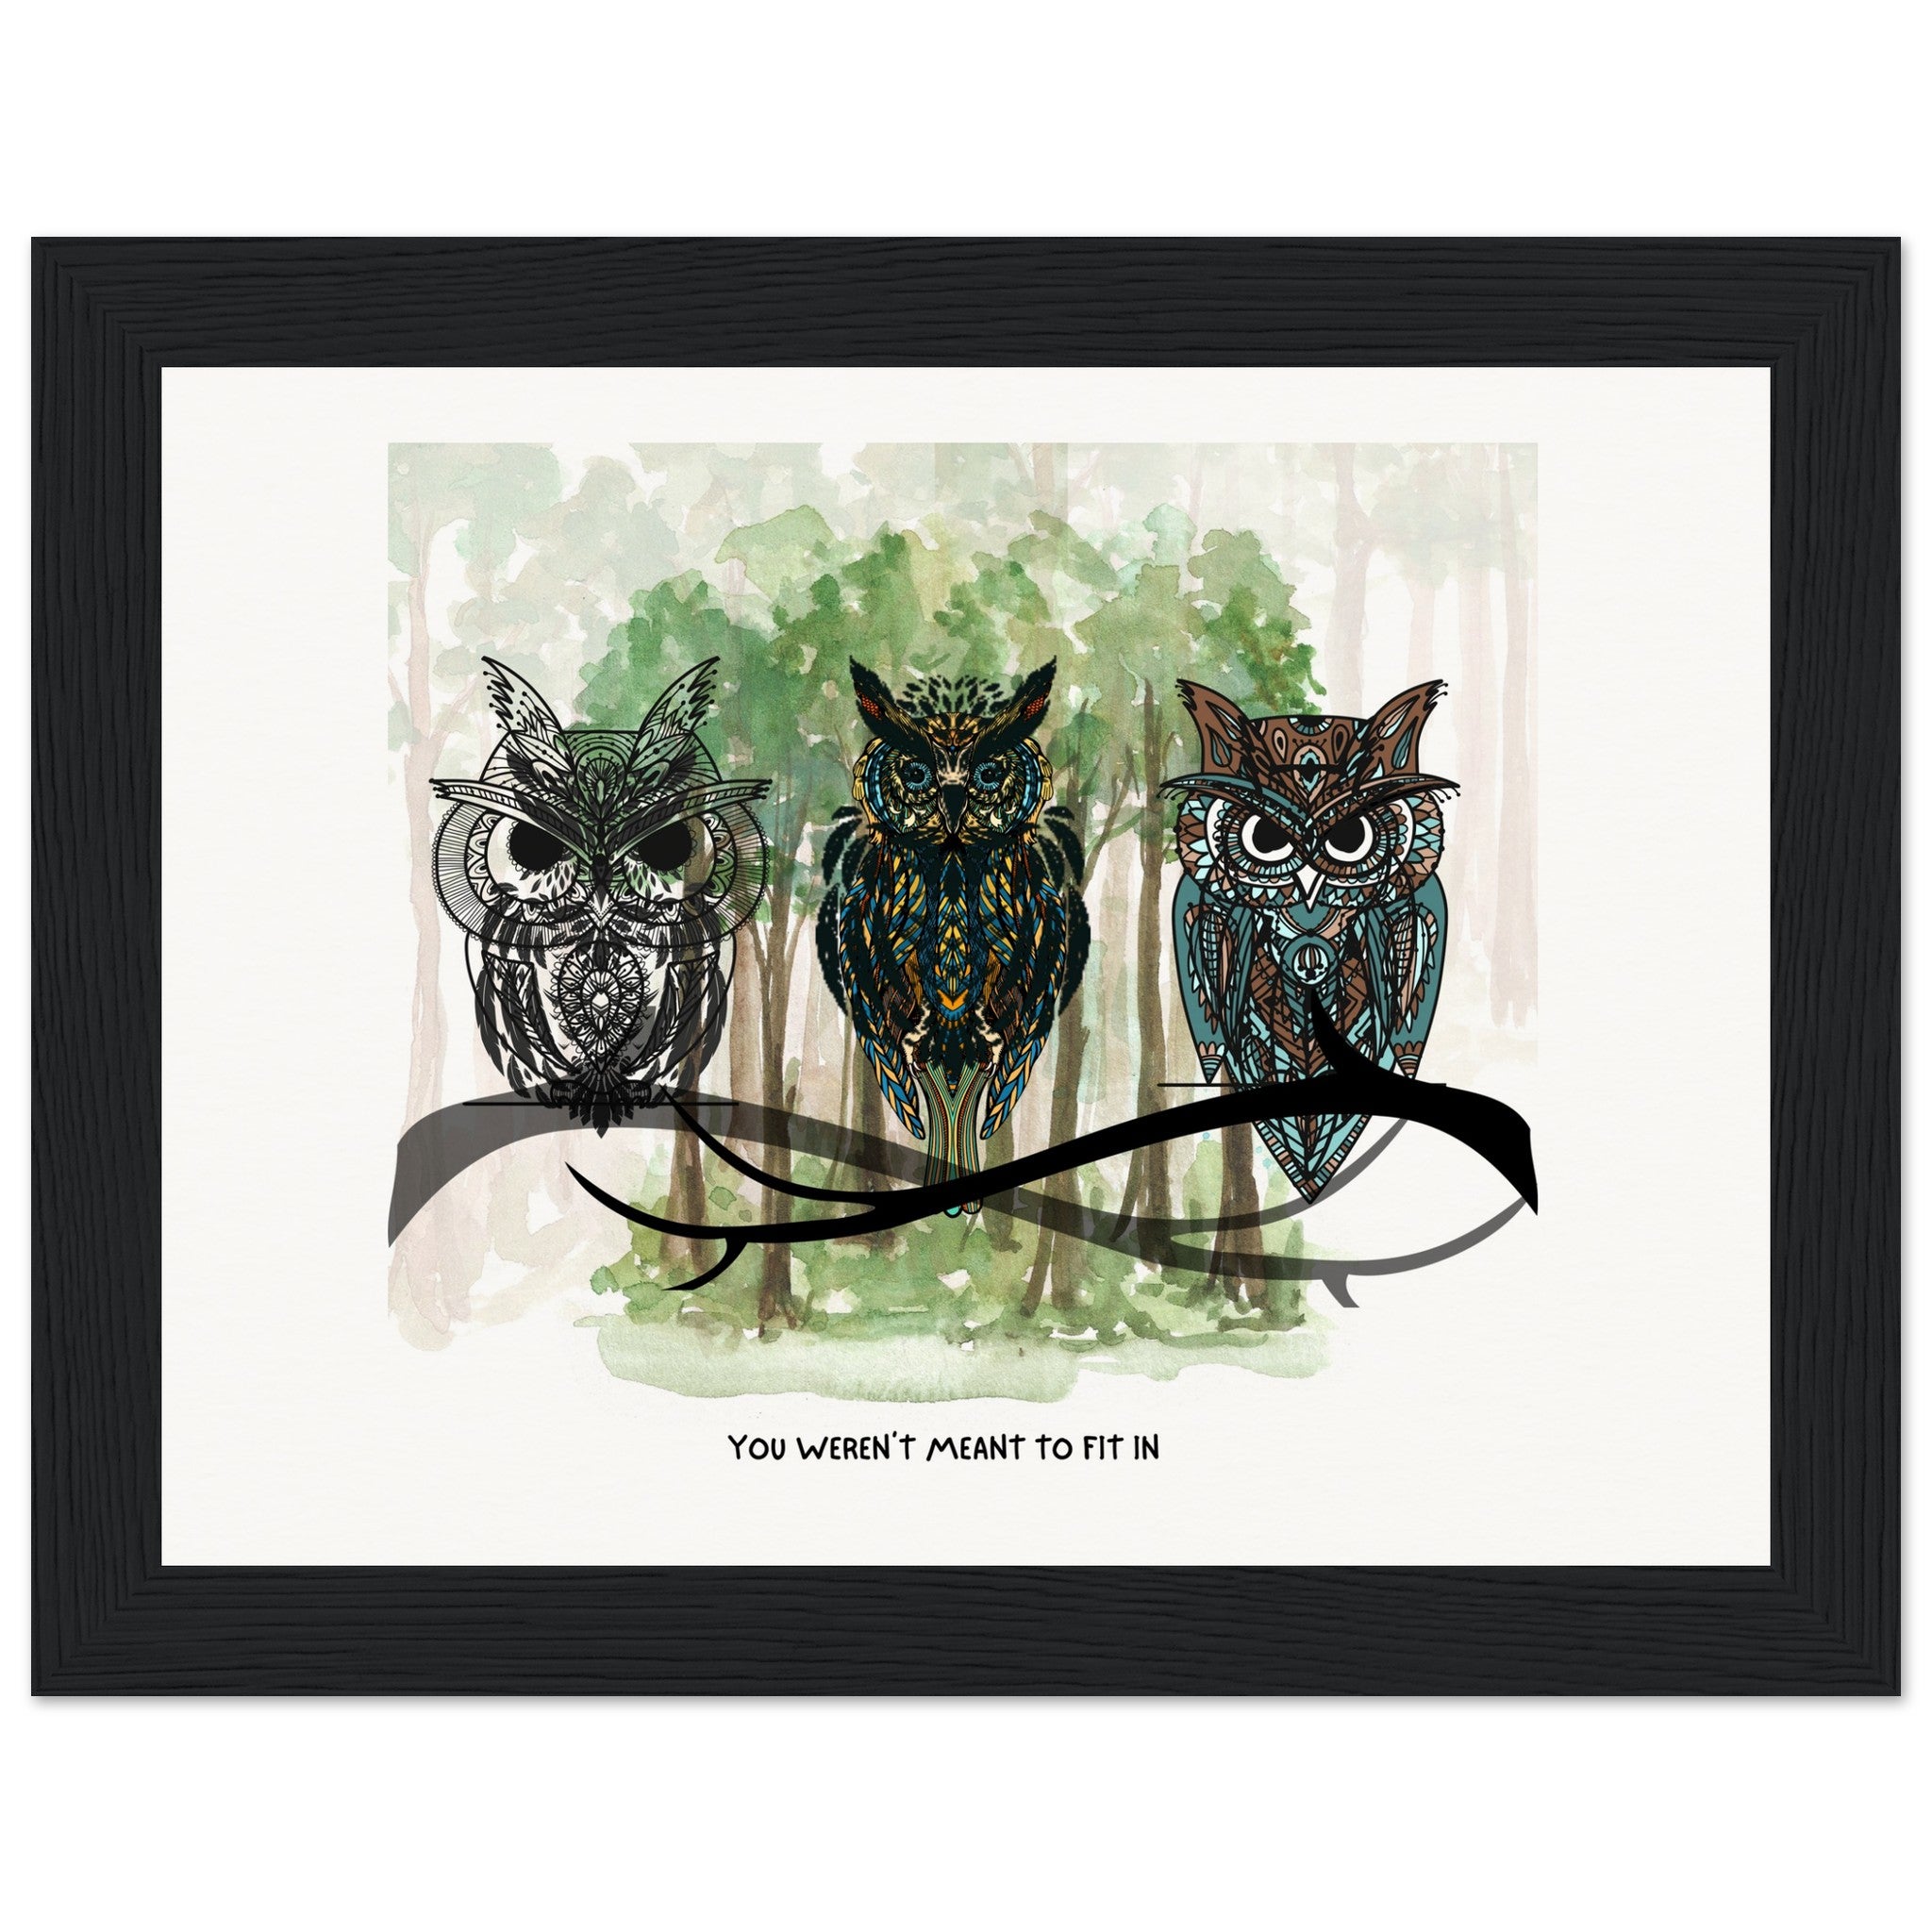 Three unique Owls  in a forest sitting on branches